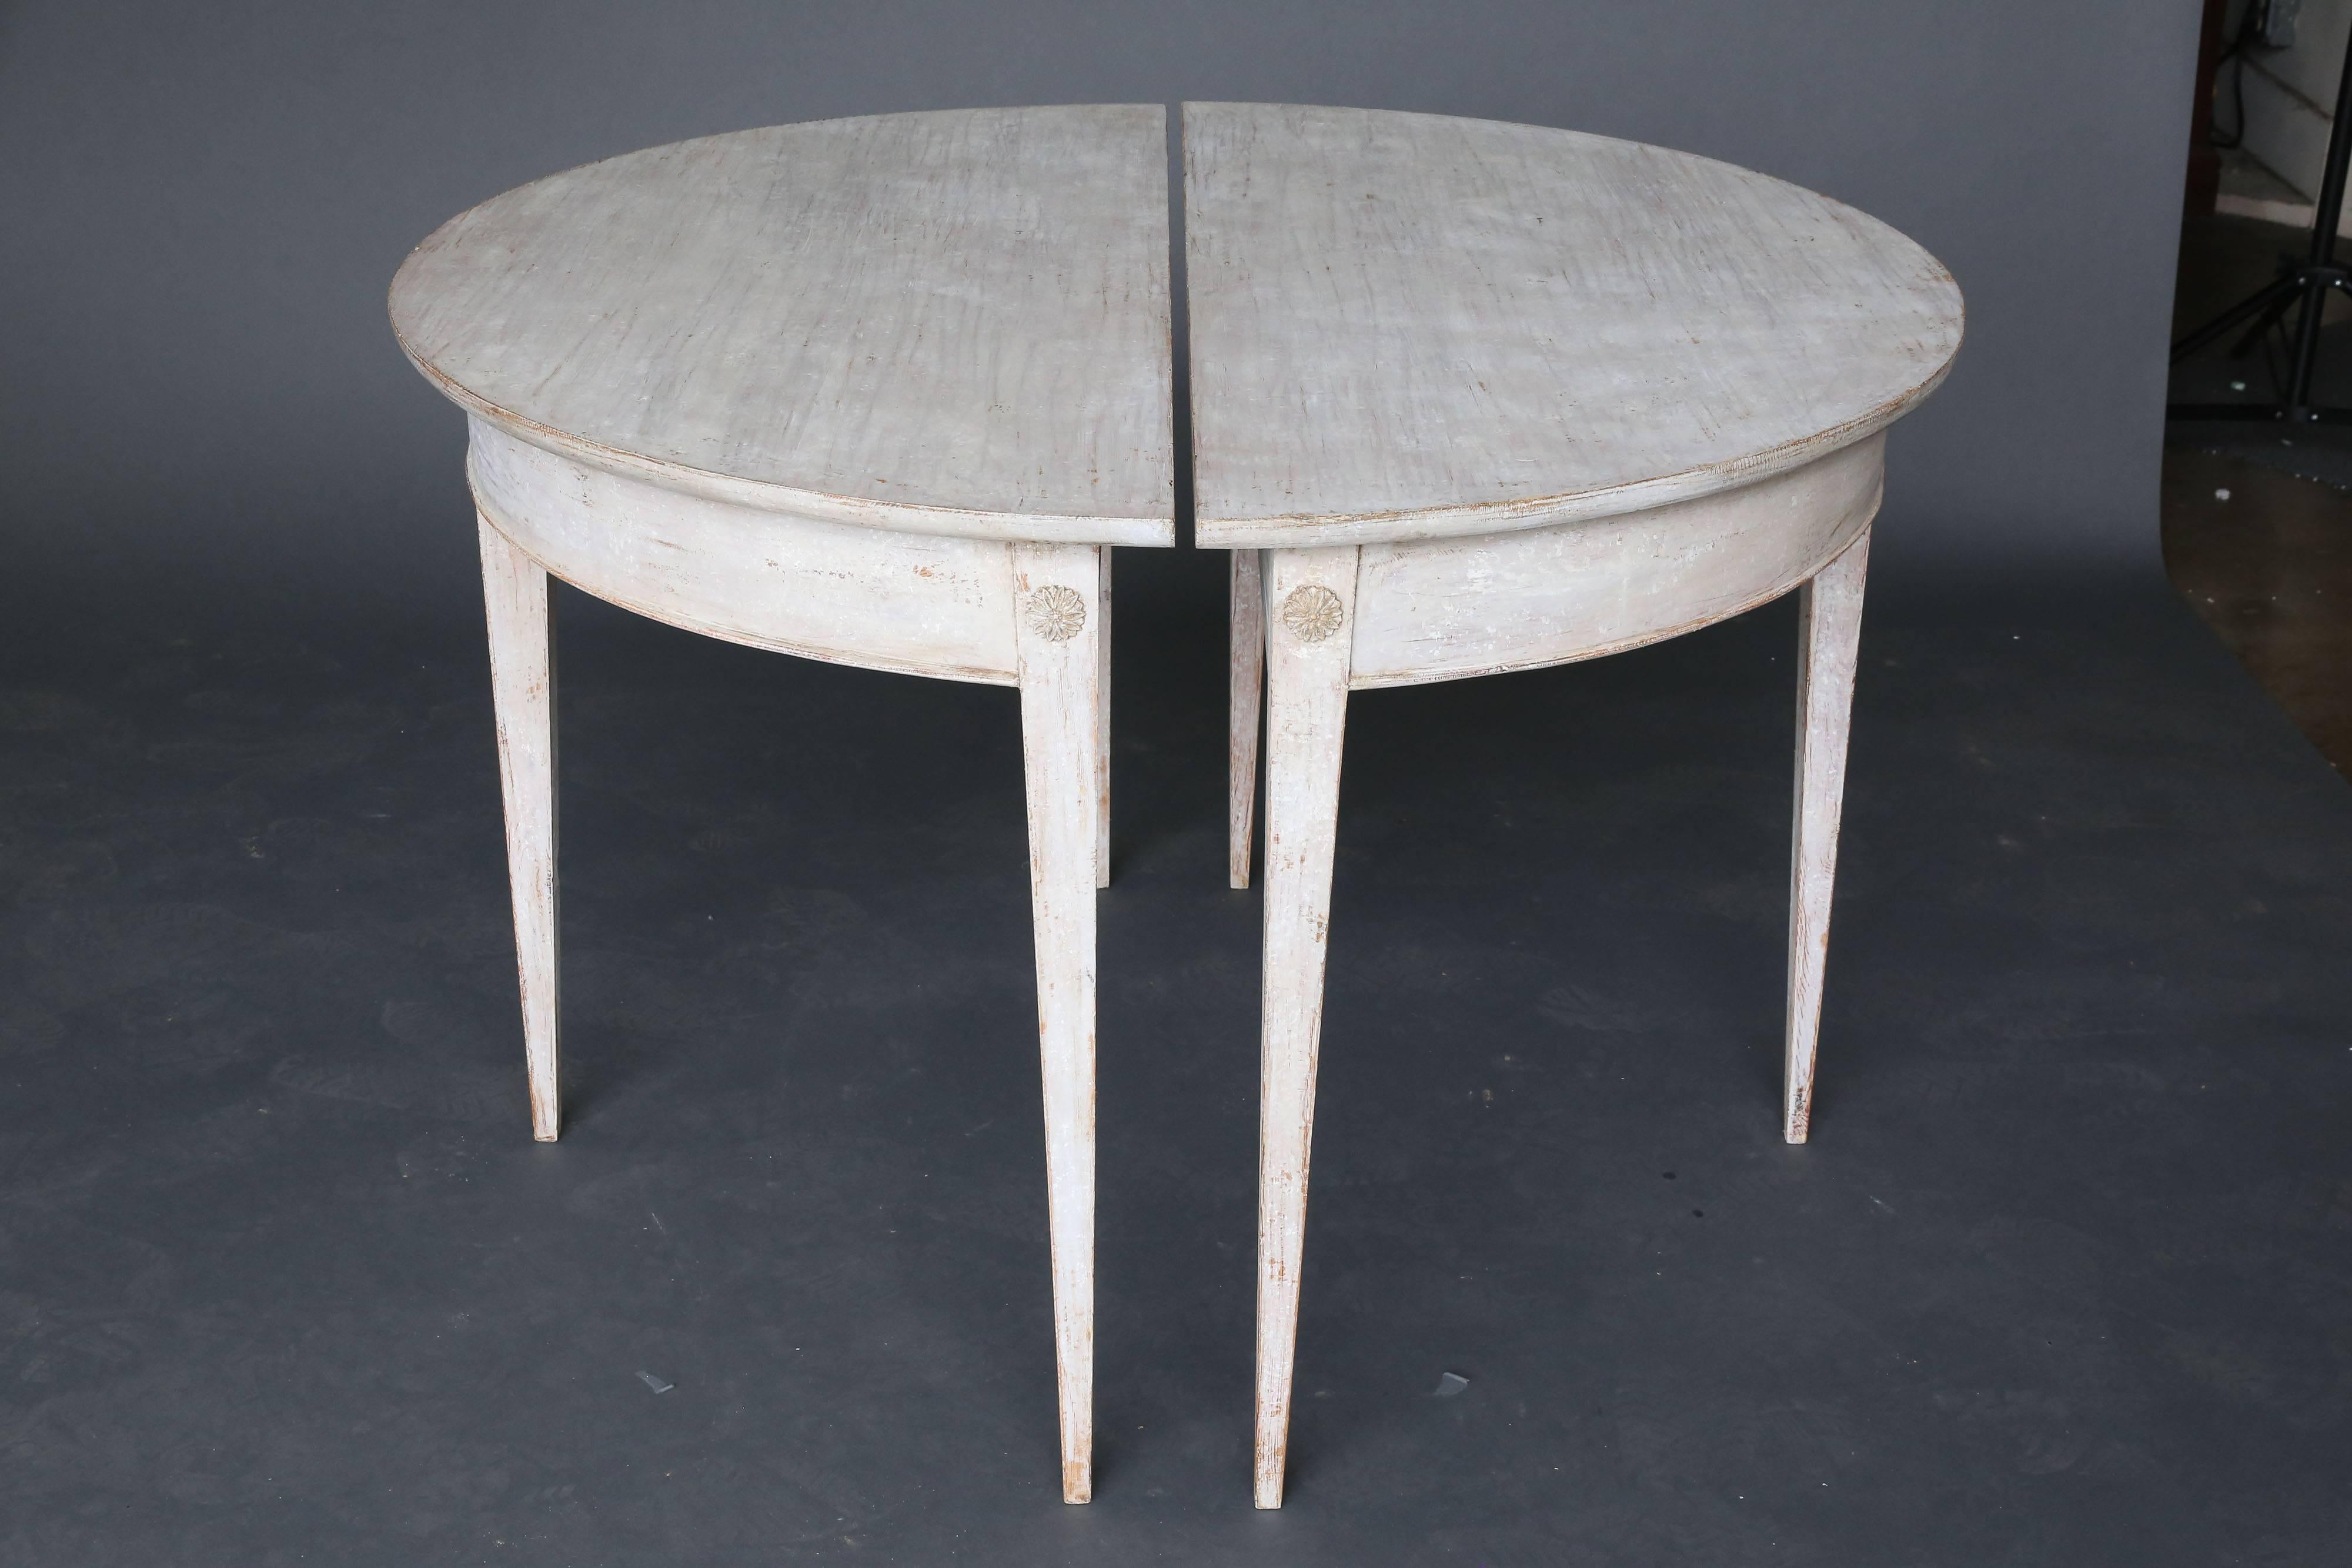 Pair of 19th century demilune Swedish tables with three medallians details on each table on three tapered legs. Beautiful patina with original paint.